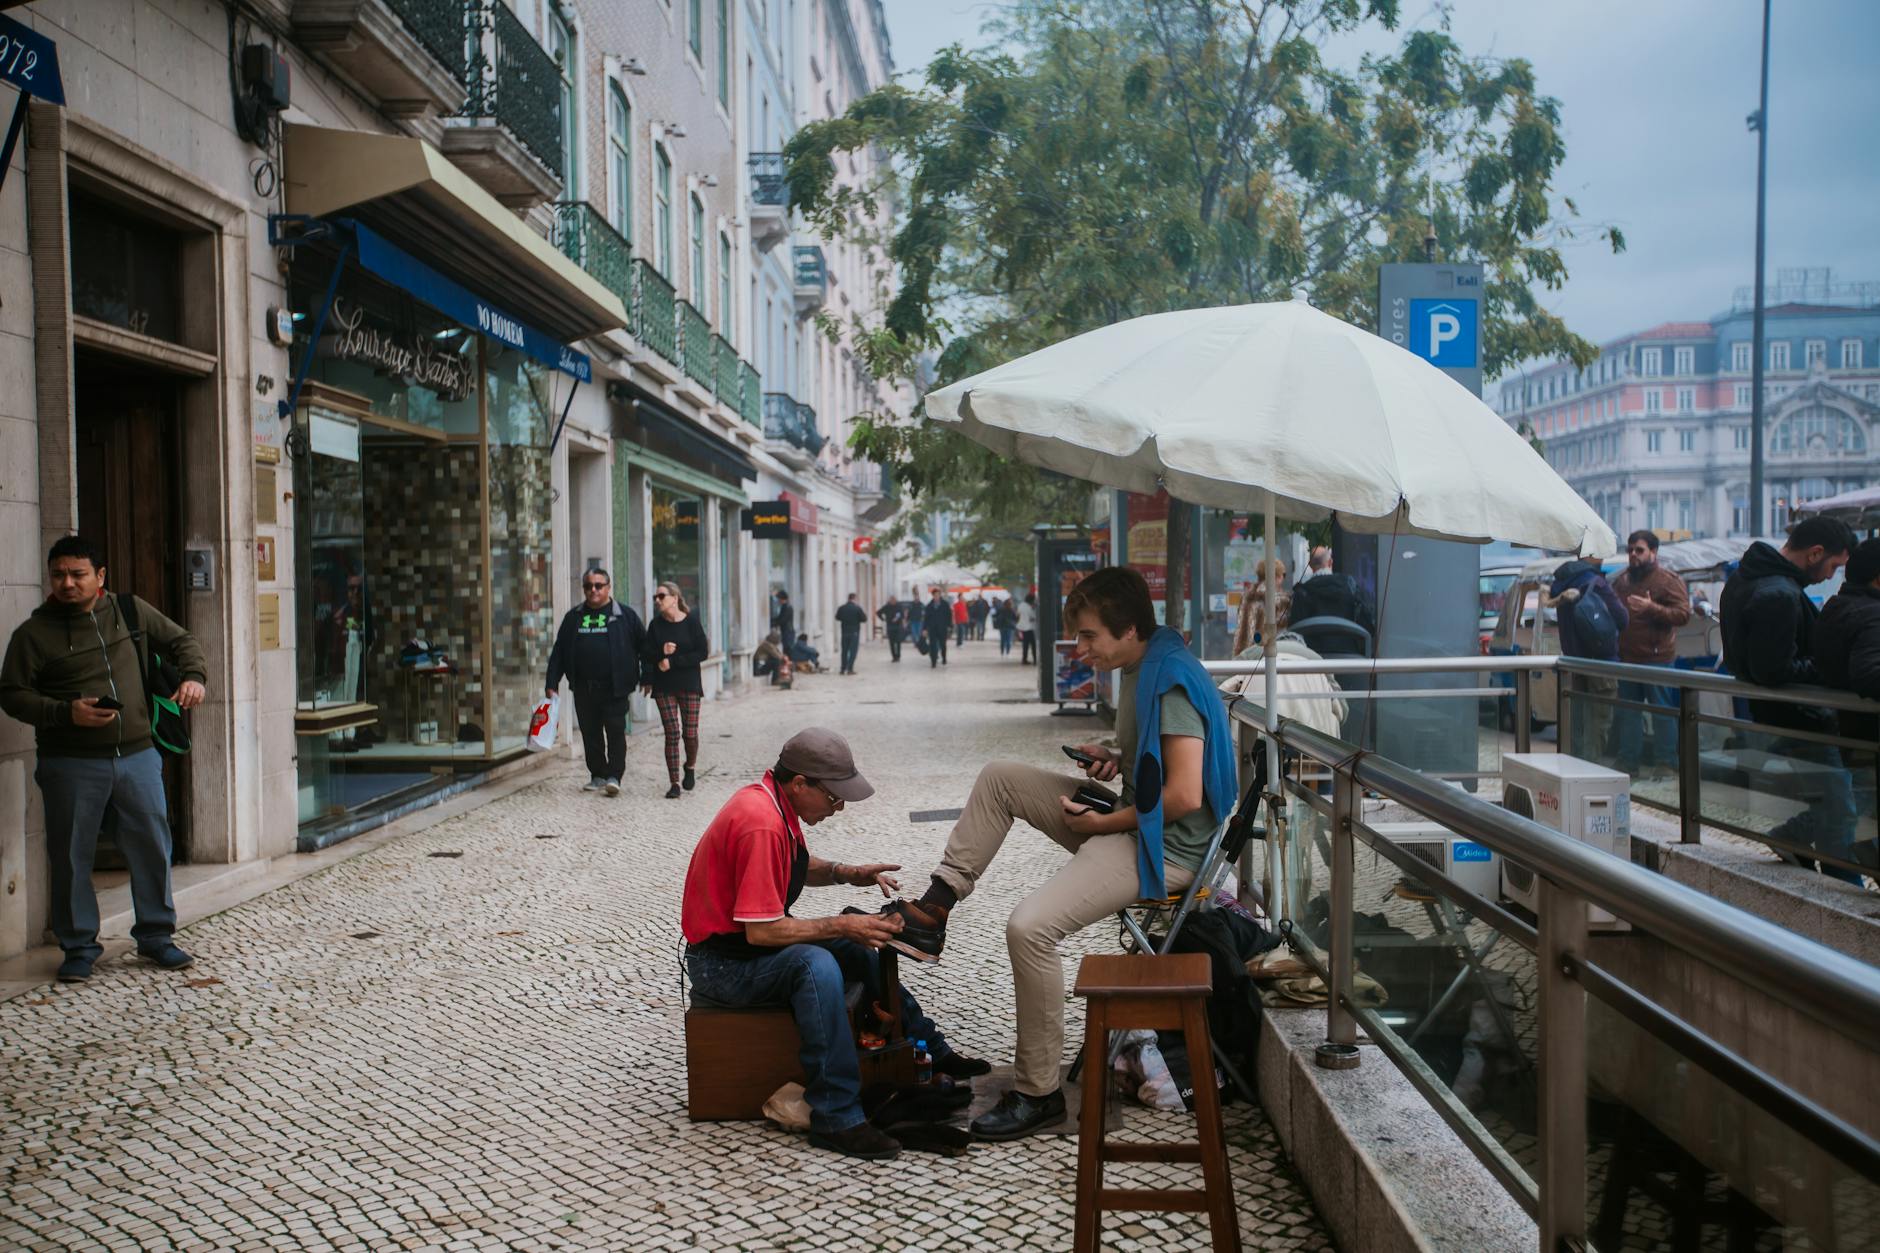 Young shoe shiner polishing boots of male tourist on street